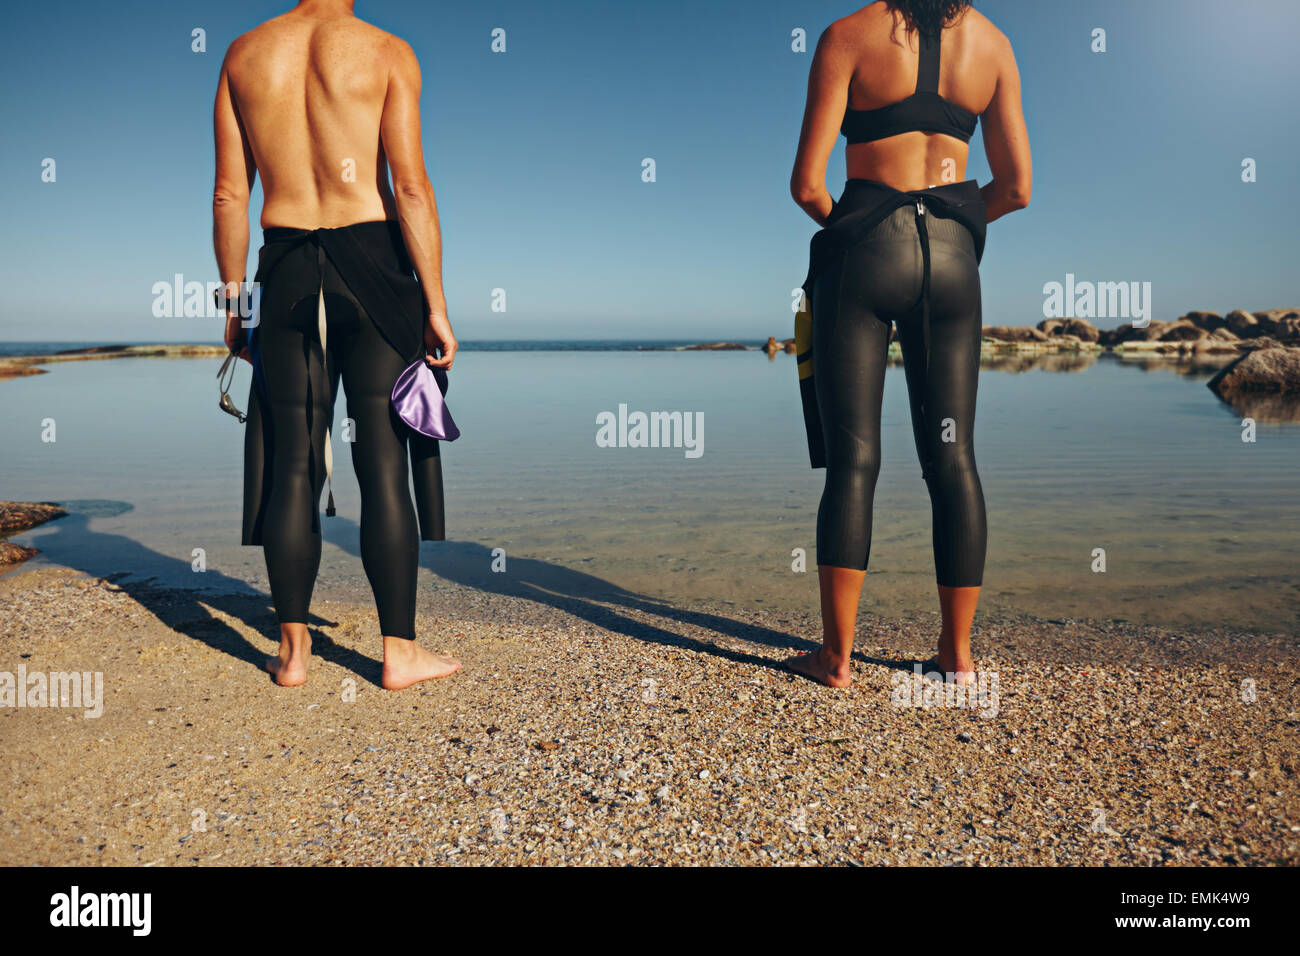 Cropped view of athletes standing on beach preparing for a race. Man and woman preparing for triathlon wearing a wetsuit. Stock Photo